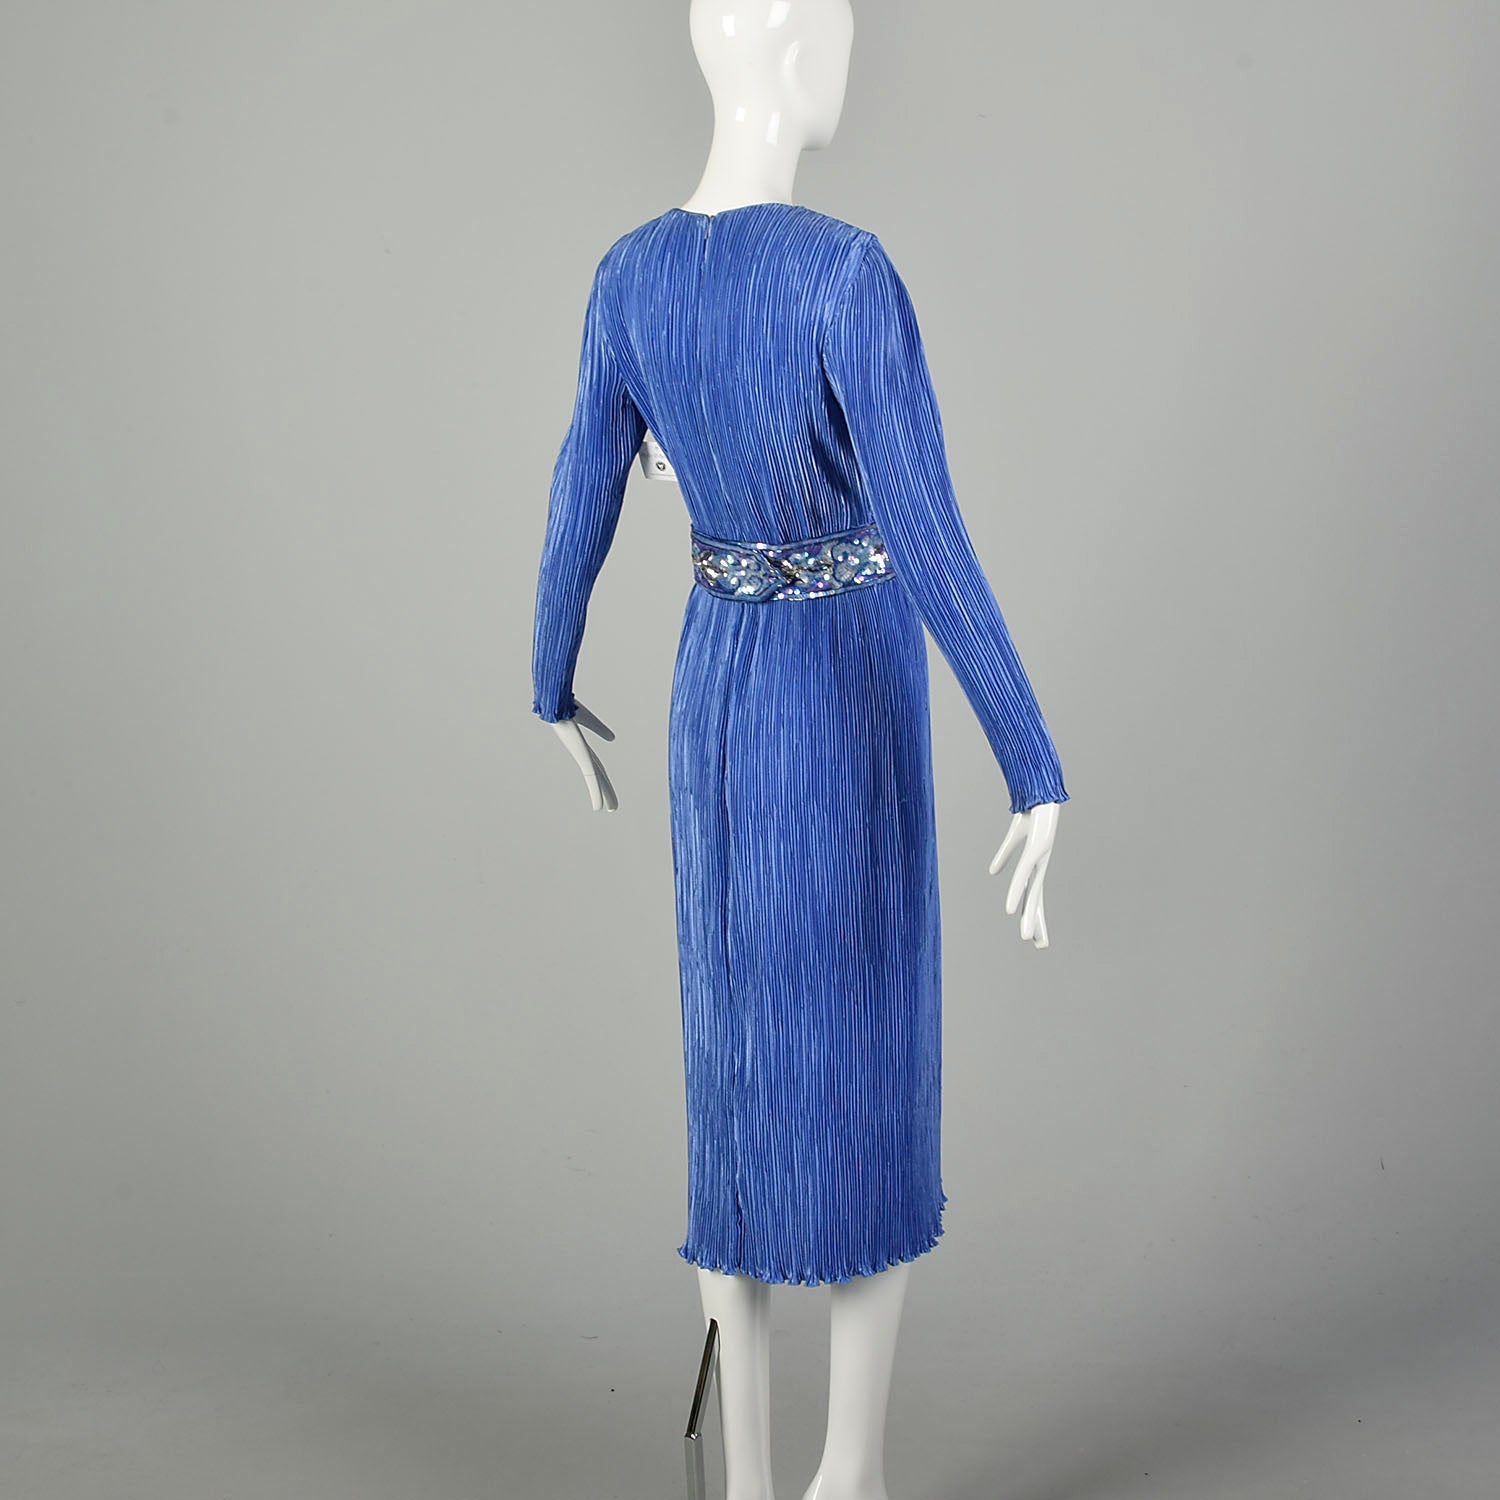 Small 1980s Fortuny Pleated Periwinkle Dress Blue Evening Dress Cocktail Dress Sequin Waistline